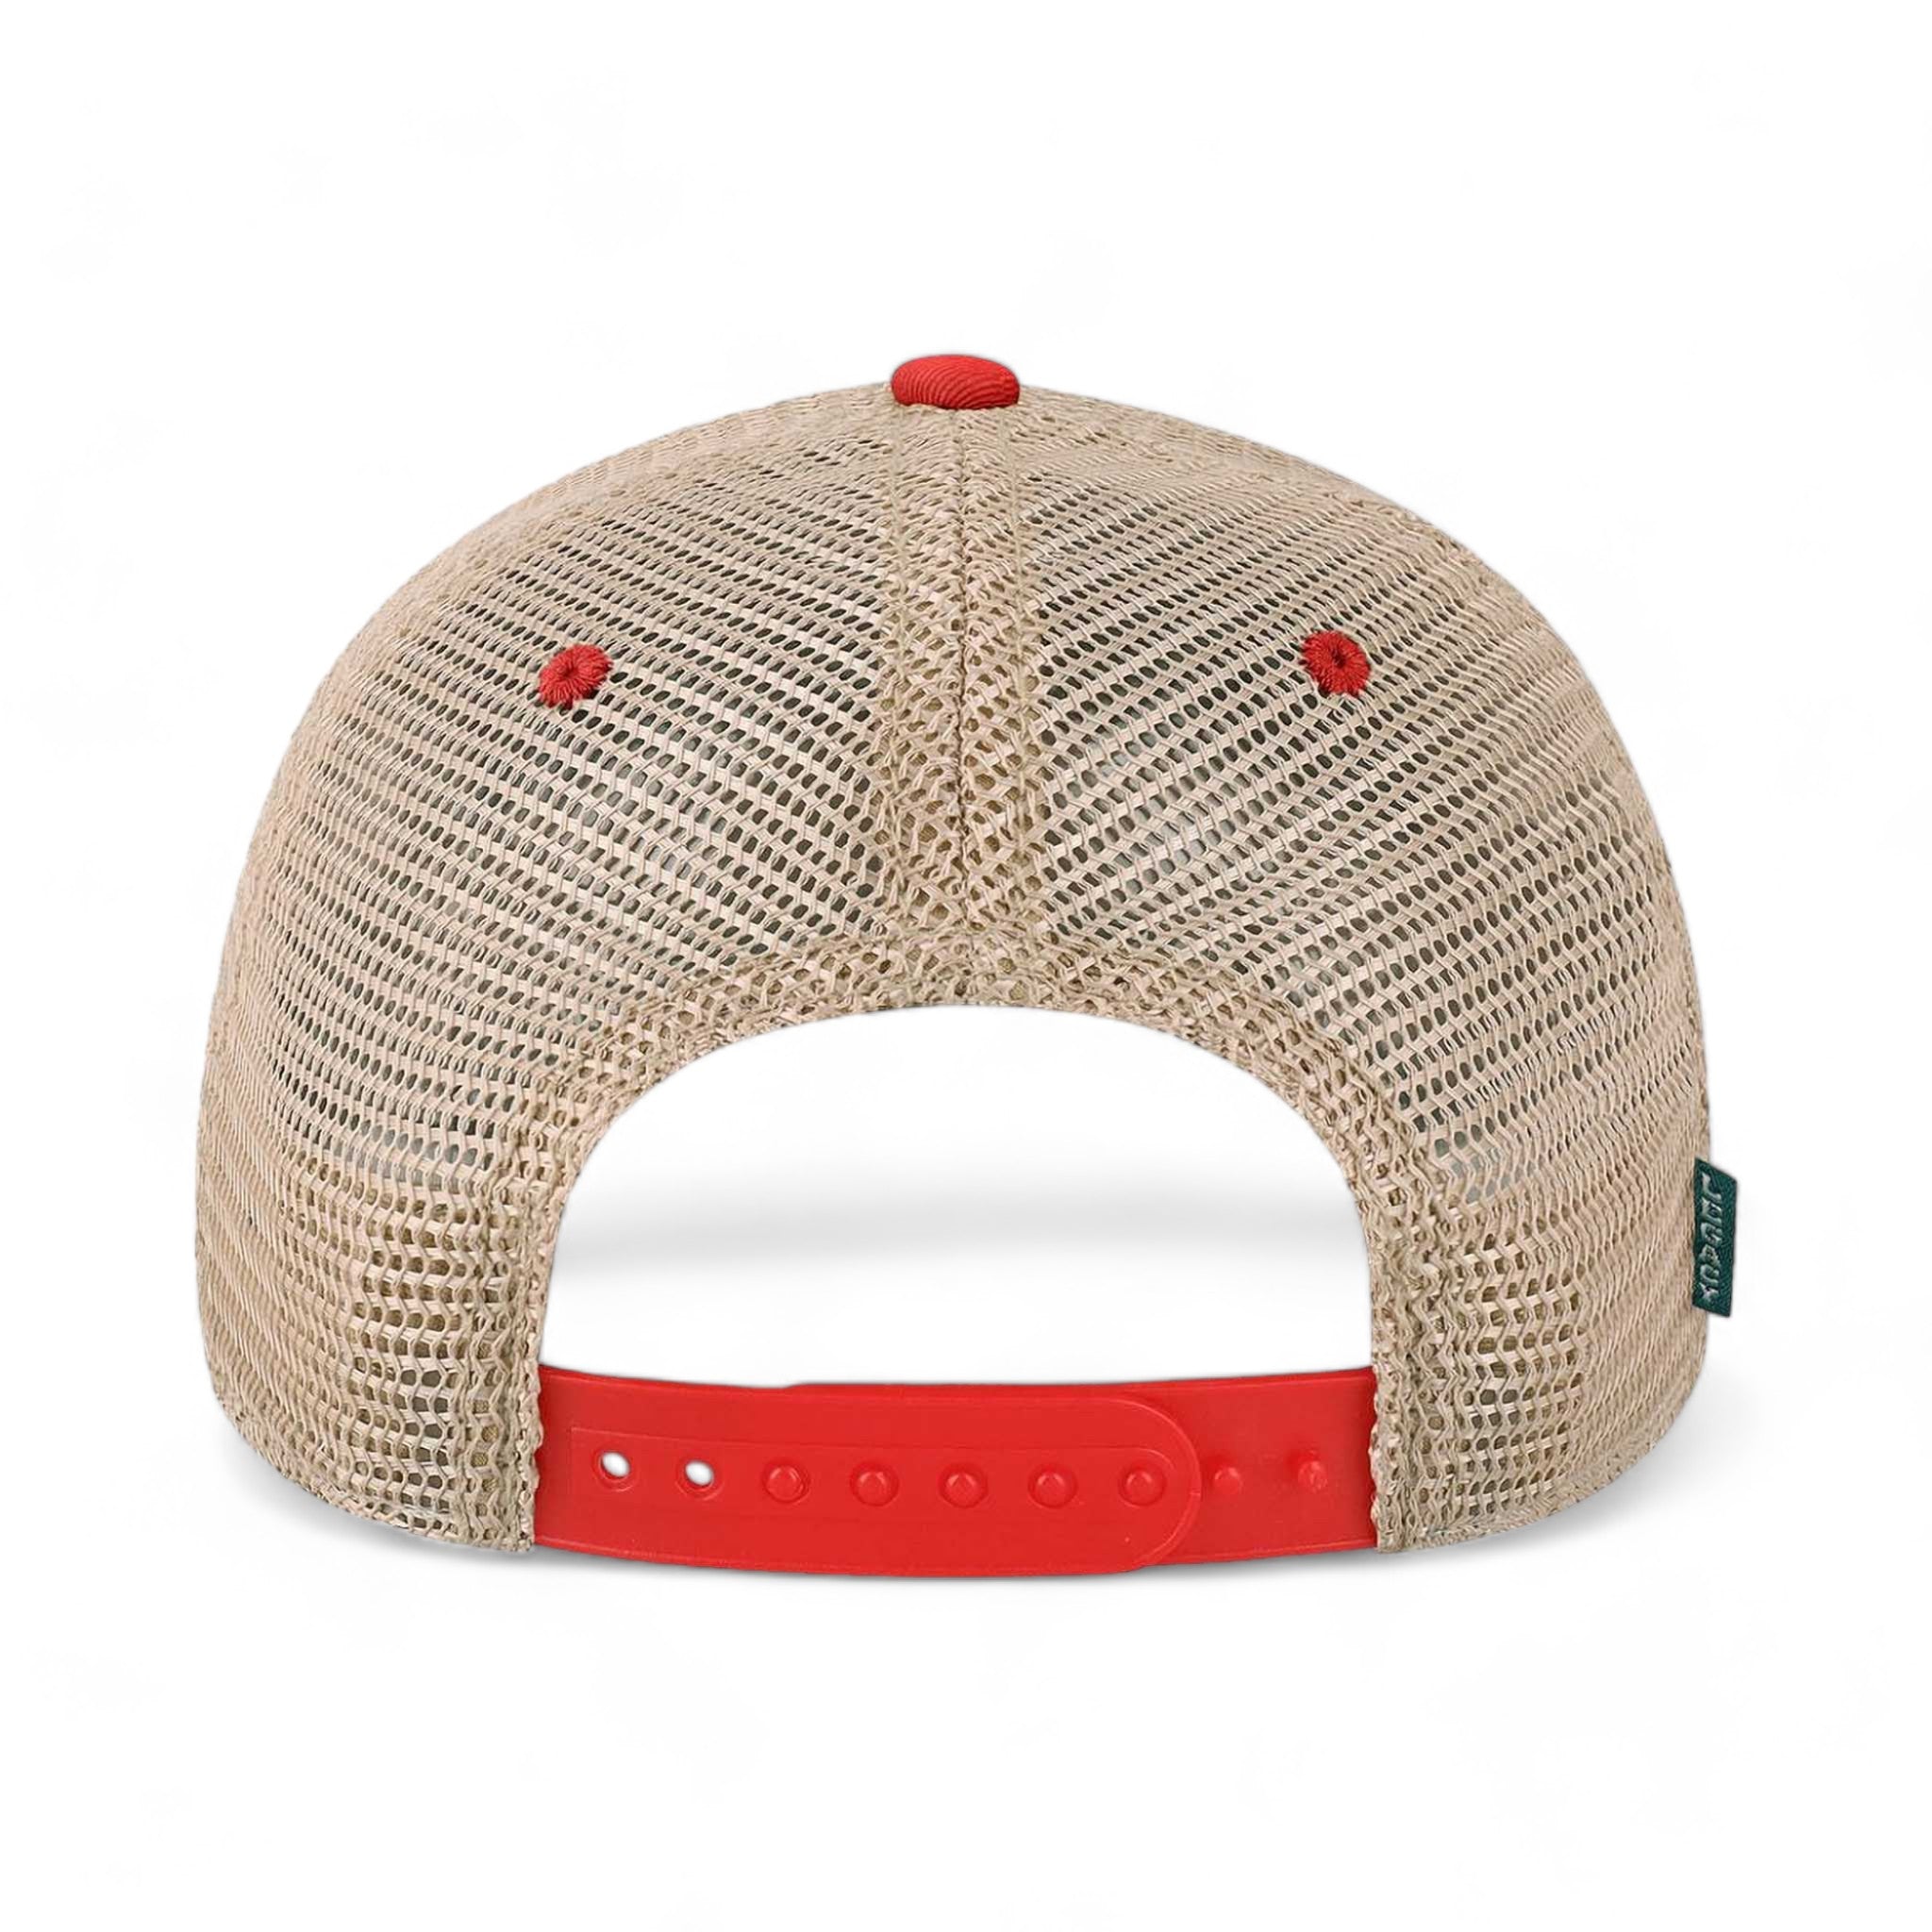 Back view of LEGACY OFAY custom hat in scarlet red and khaki